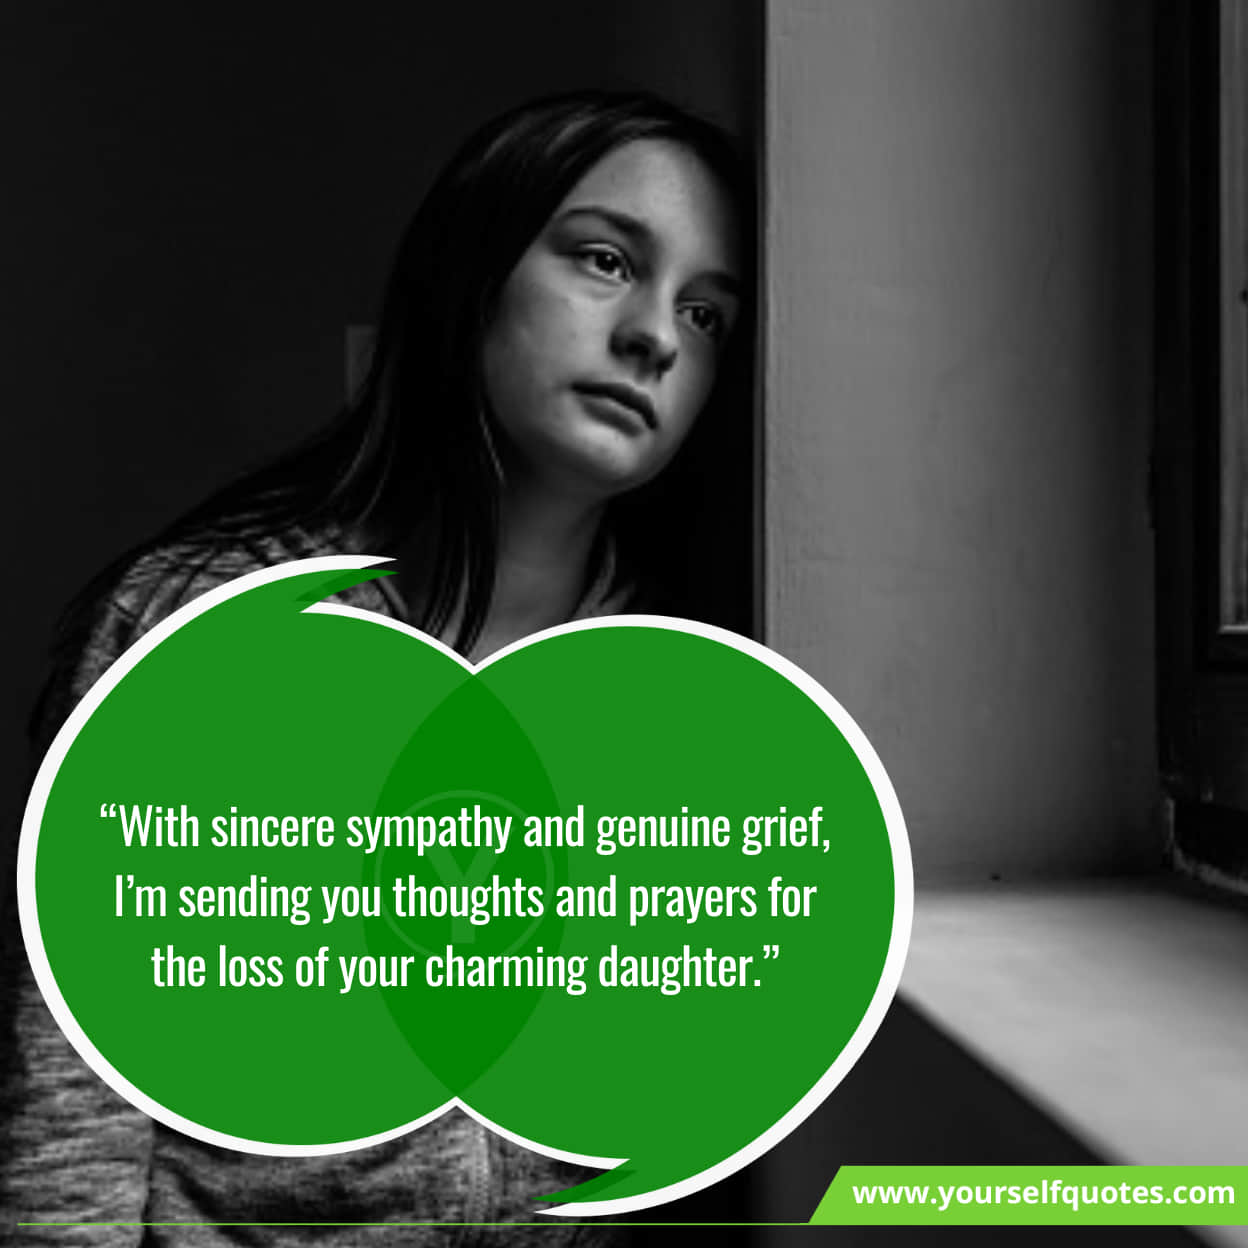 Emotional Words of Sympathy for Loss of Daughter